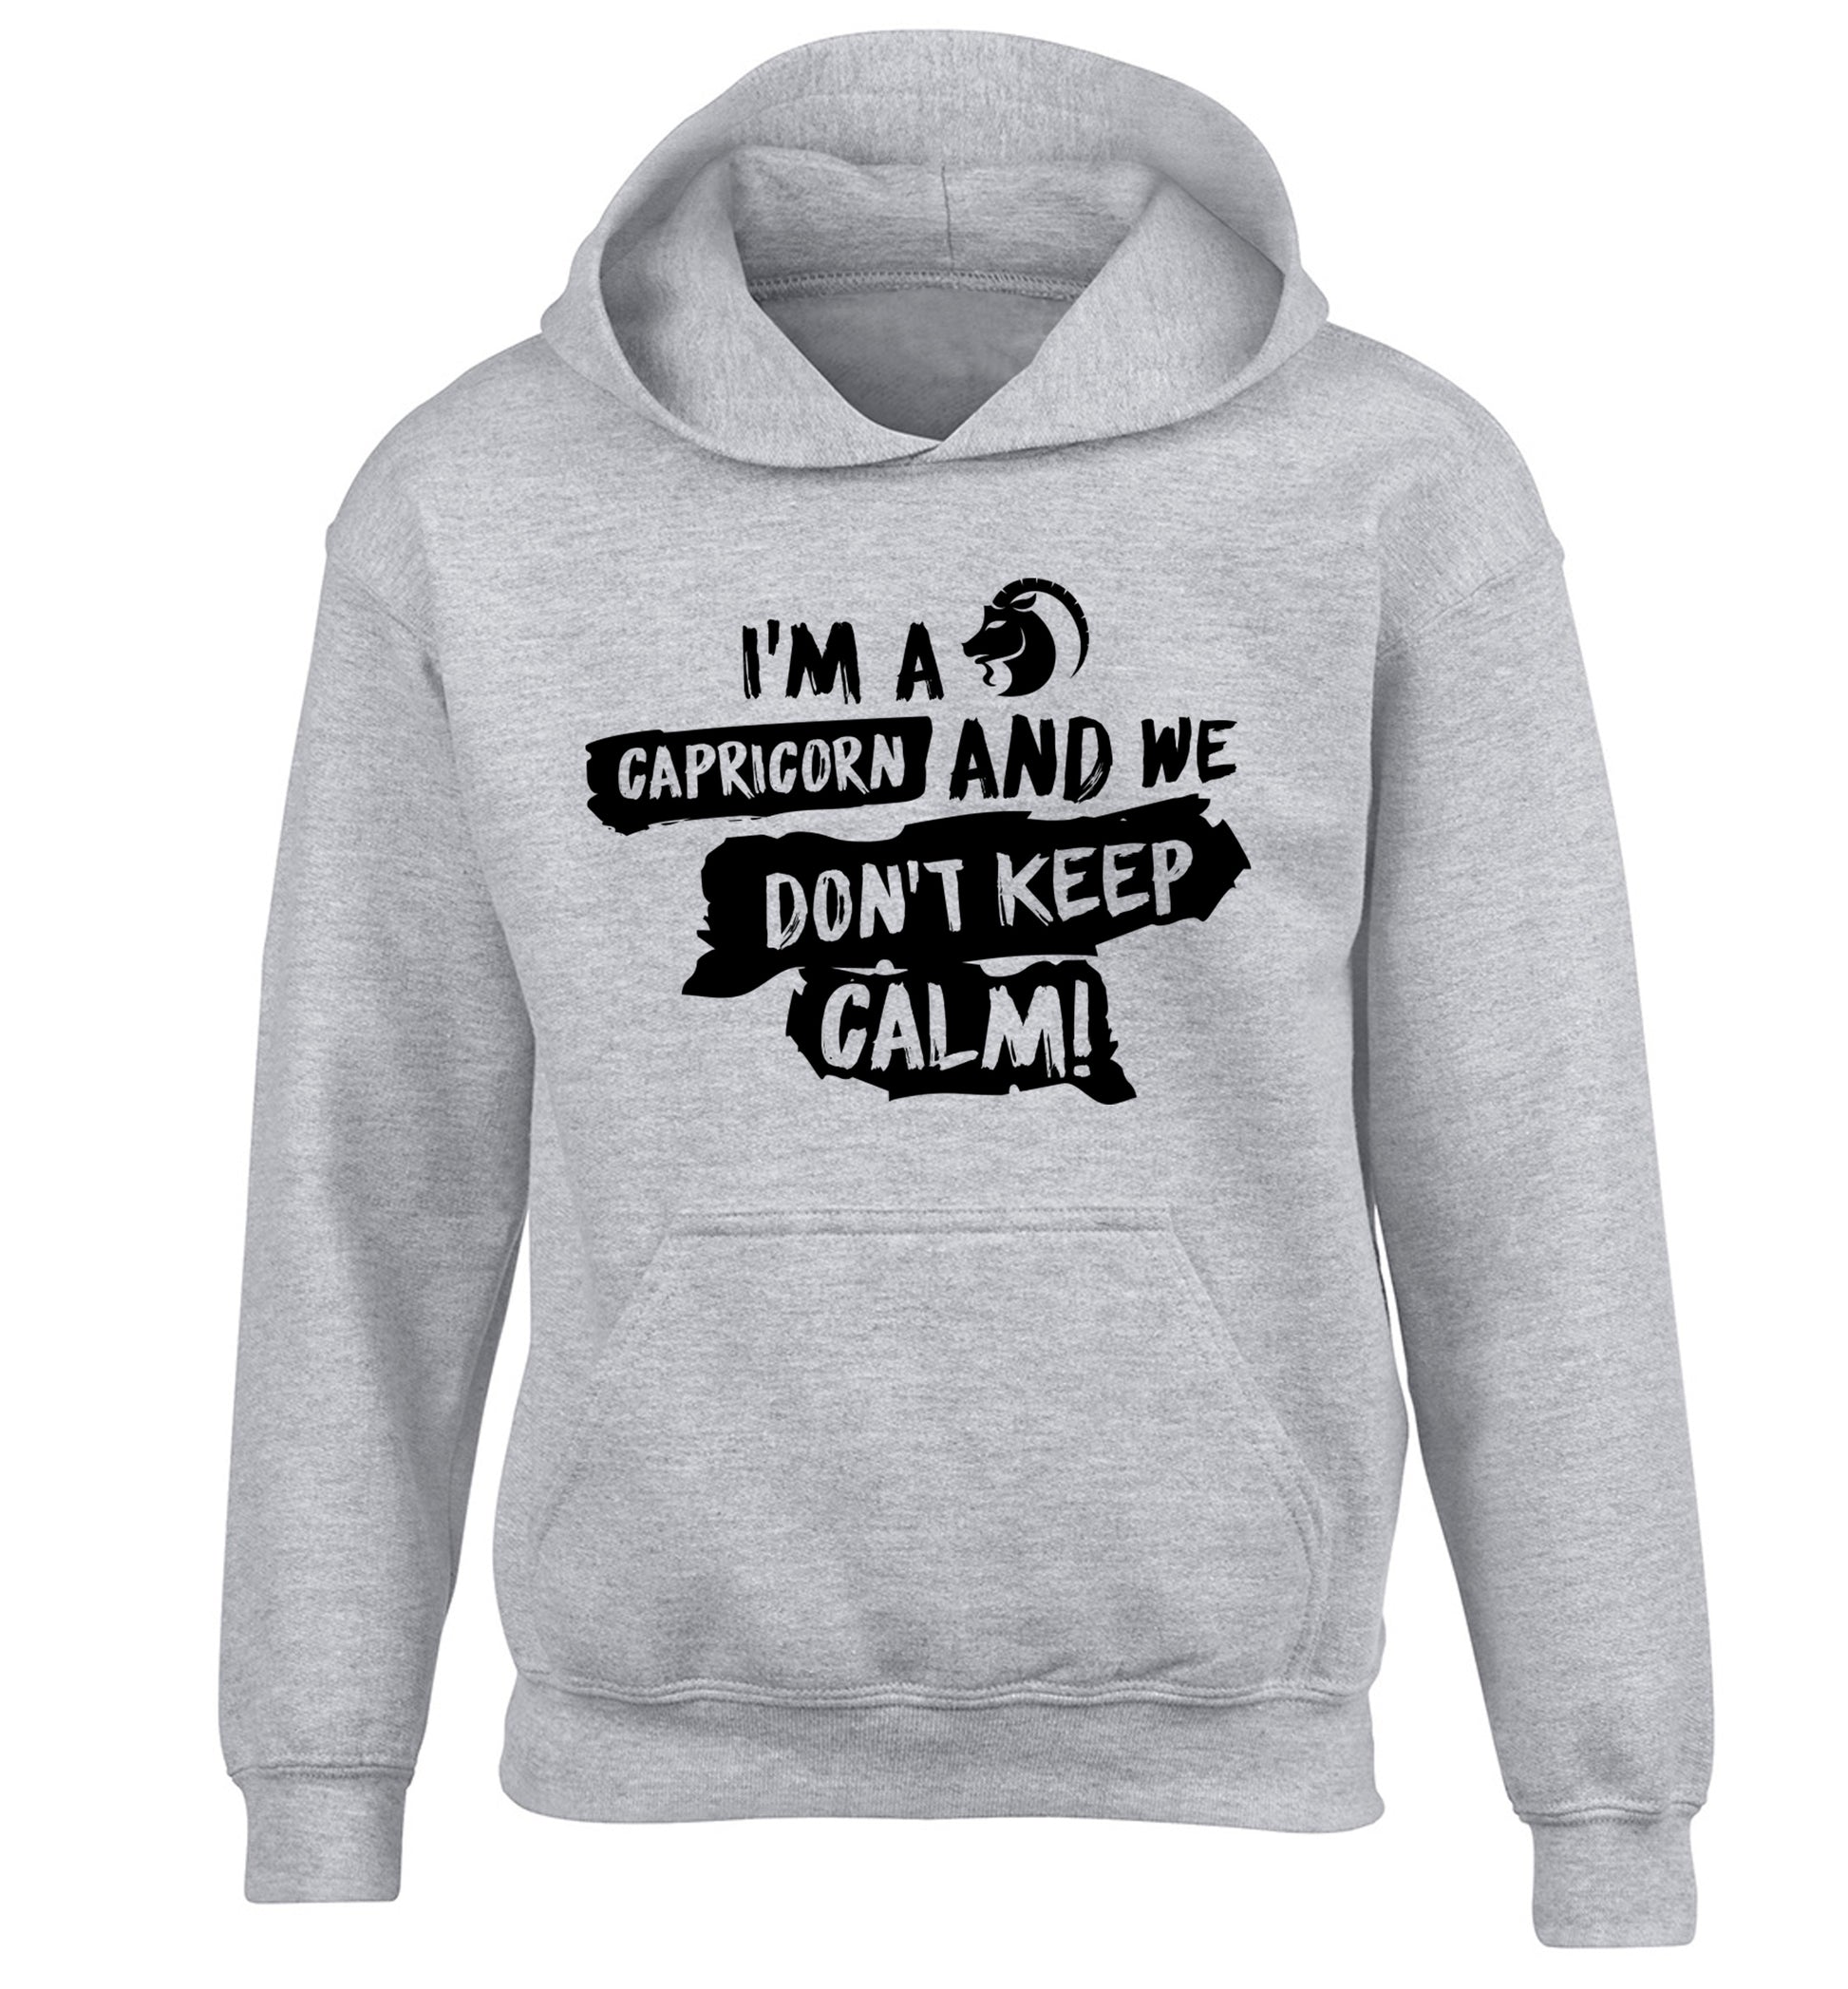 I'm a capricorn and we don't keep calm children's grey hoodie 12-13 Years